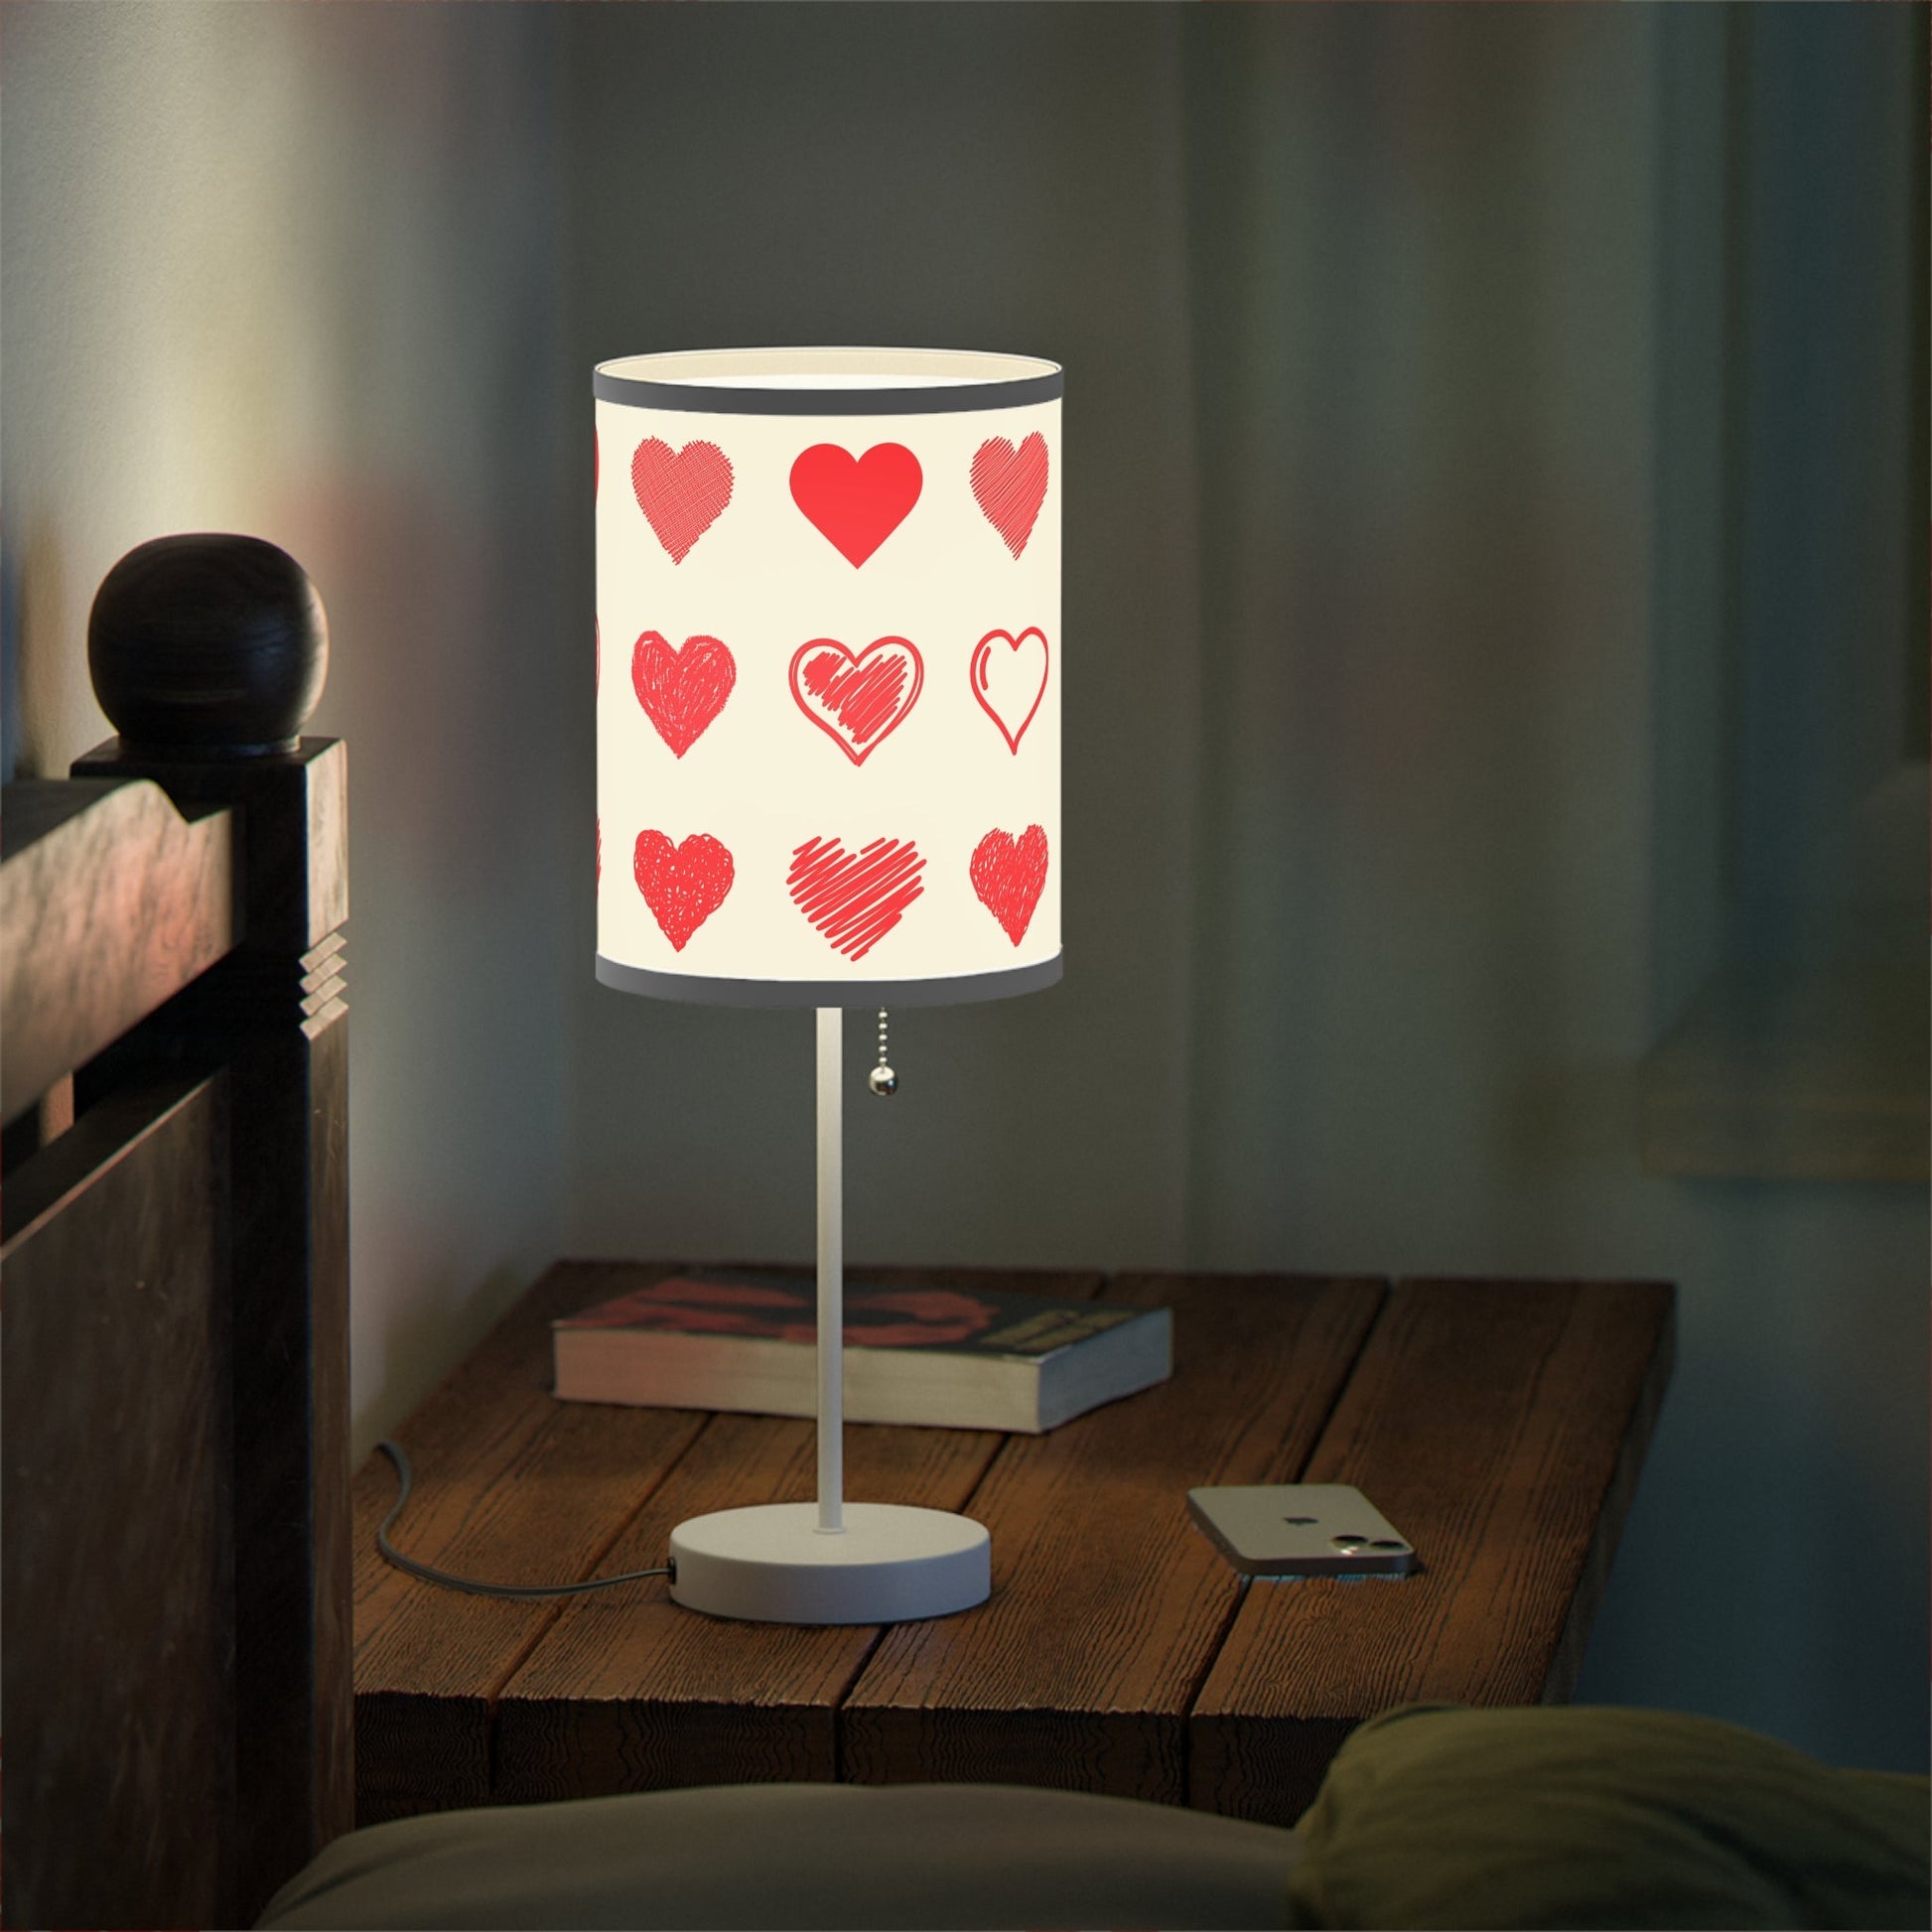 Home Decor - Shed A Light This Valentin's Lamp On A Stand, Red Hearts Romantic Light